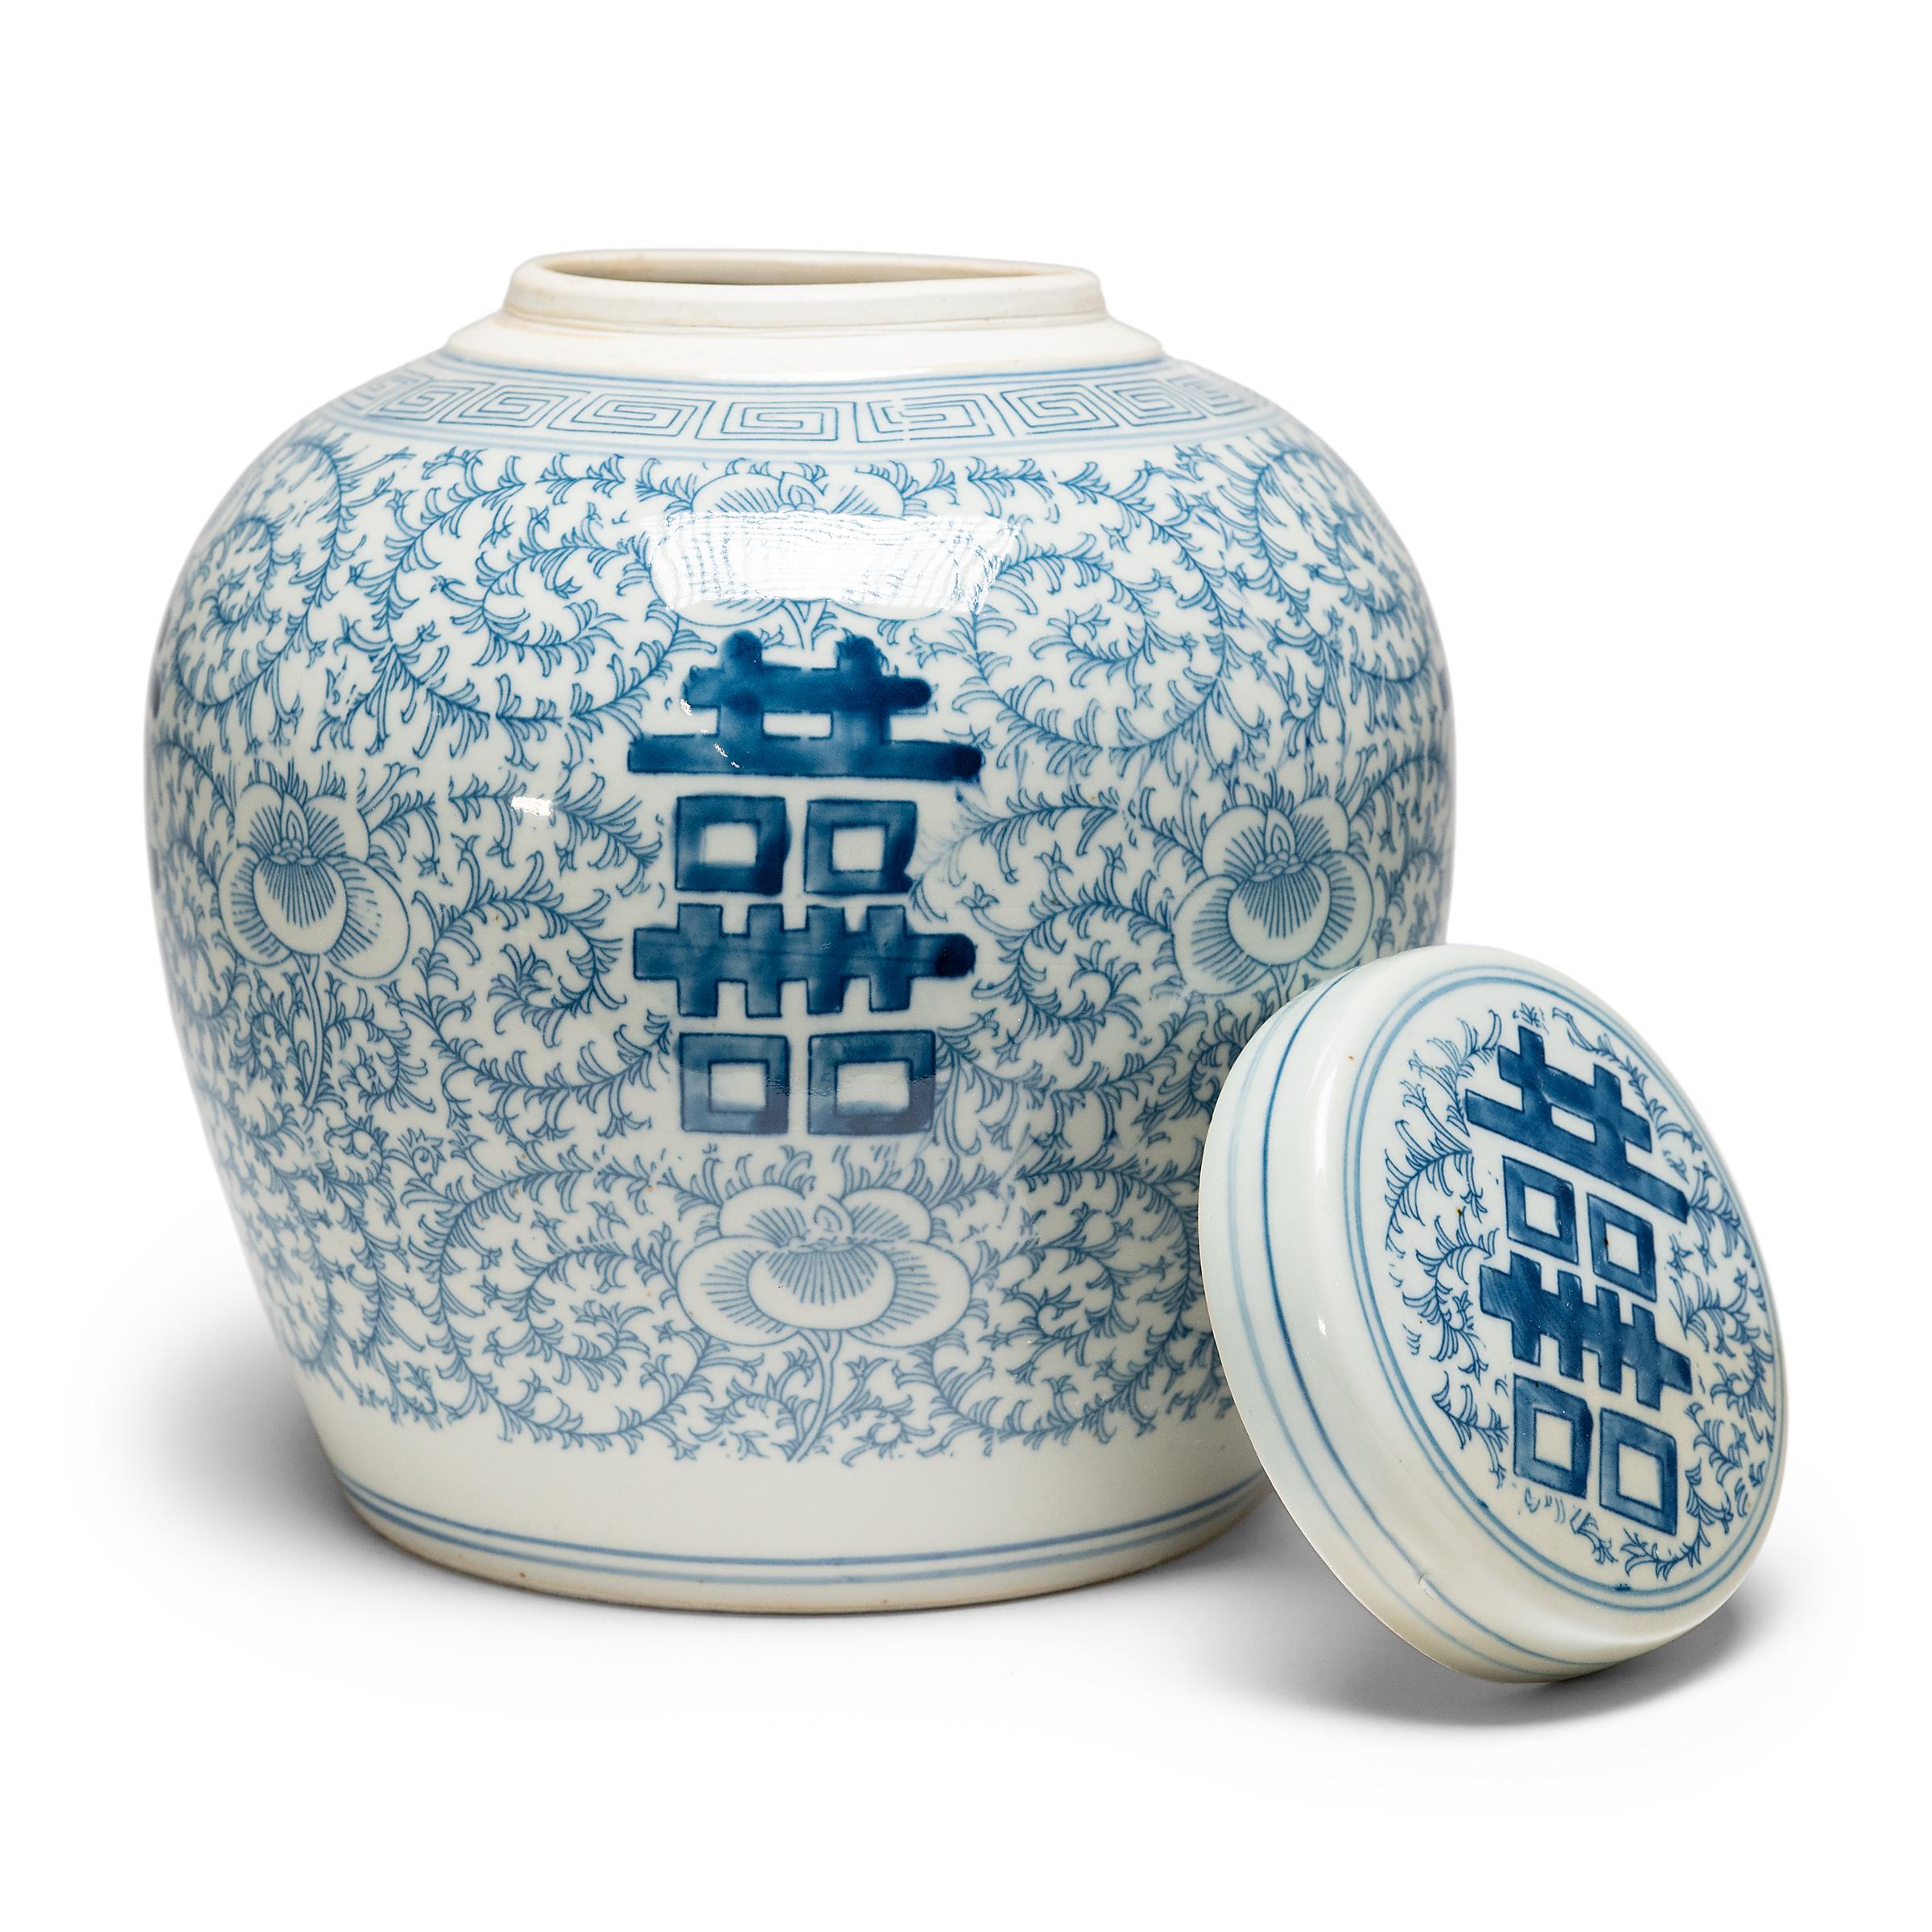 The symbol for double happiness adorns this round tea leaf jar with best wishes for love, companionship and marital bliss. Glazed in the classic blue and white manner, the porcelain jar has a rounded form with a slight taper and is topped by a flat